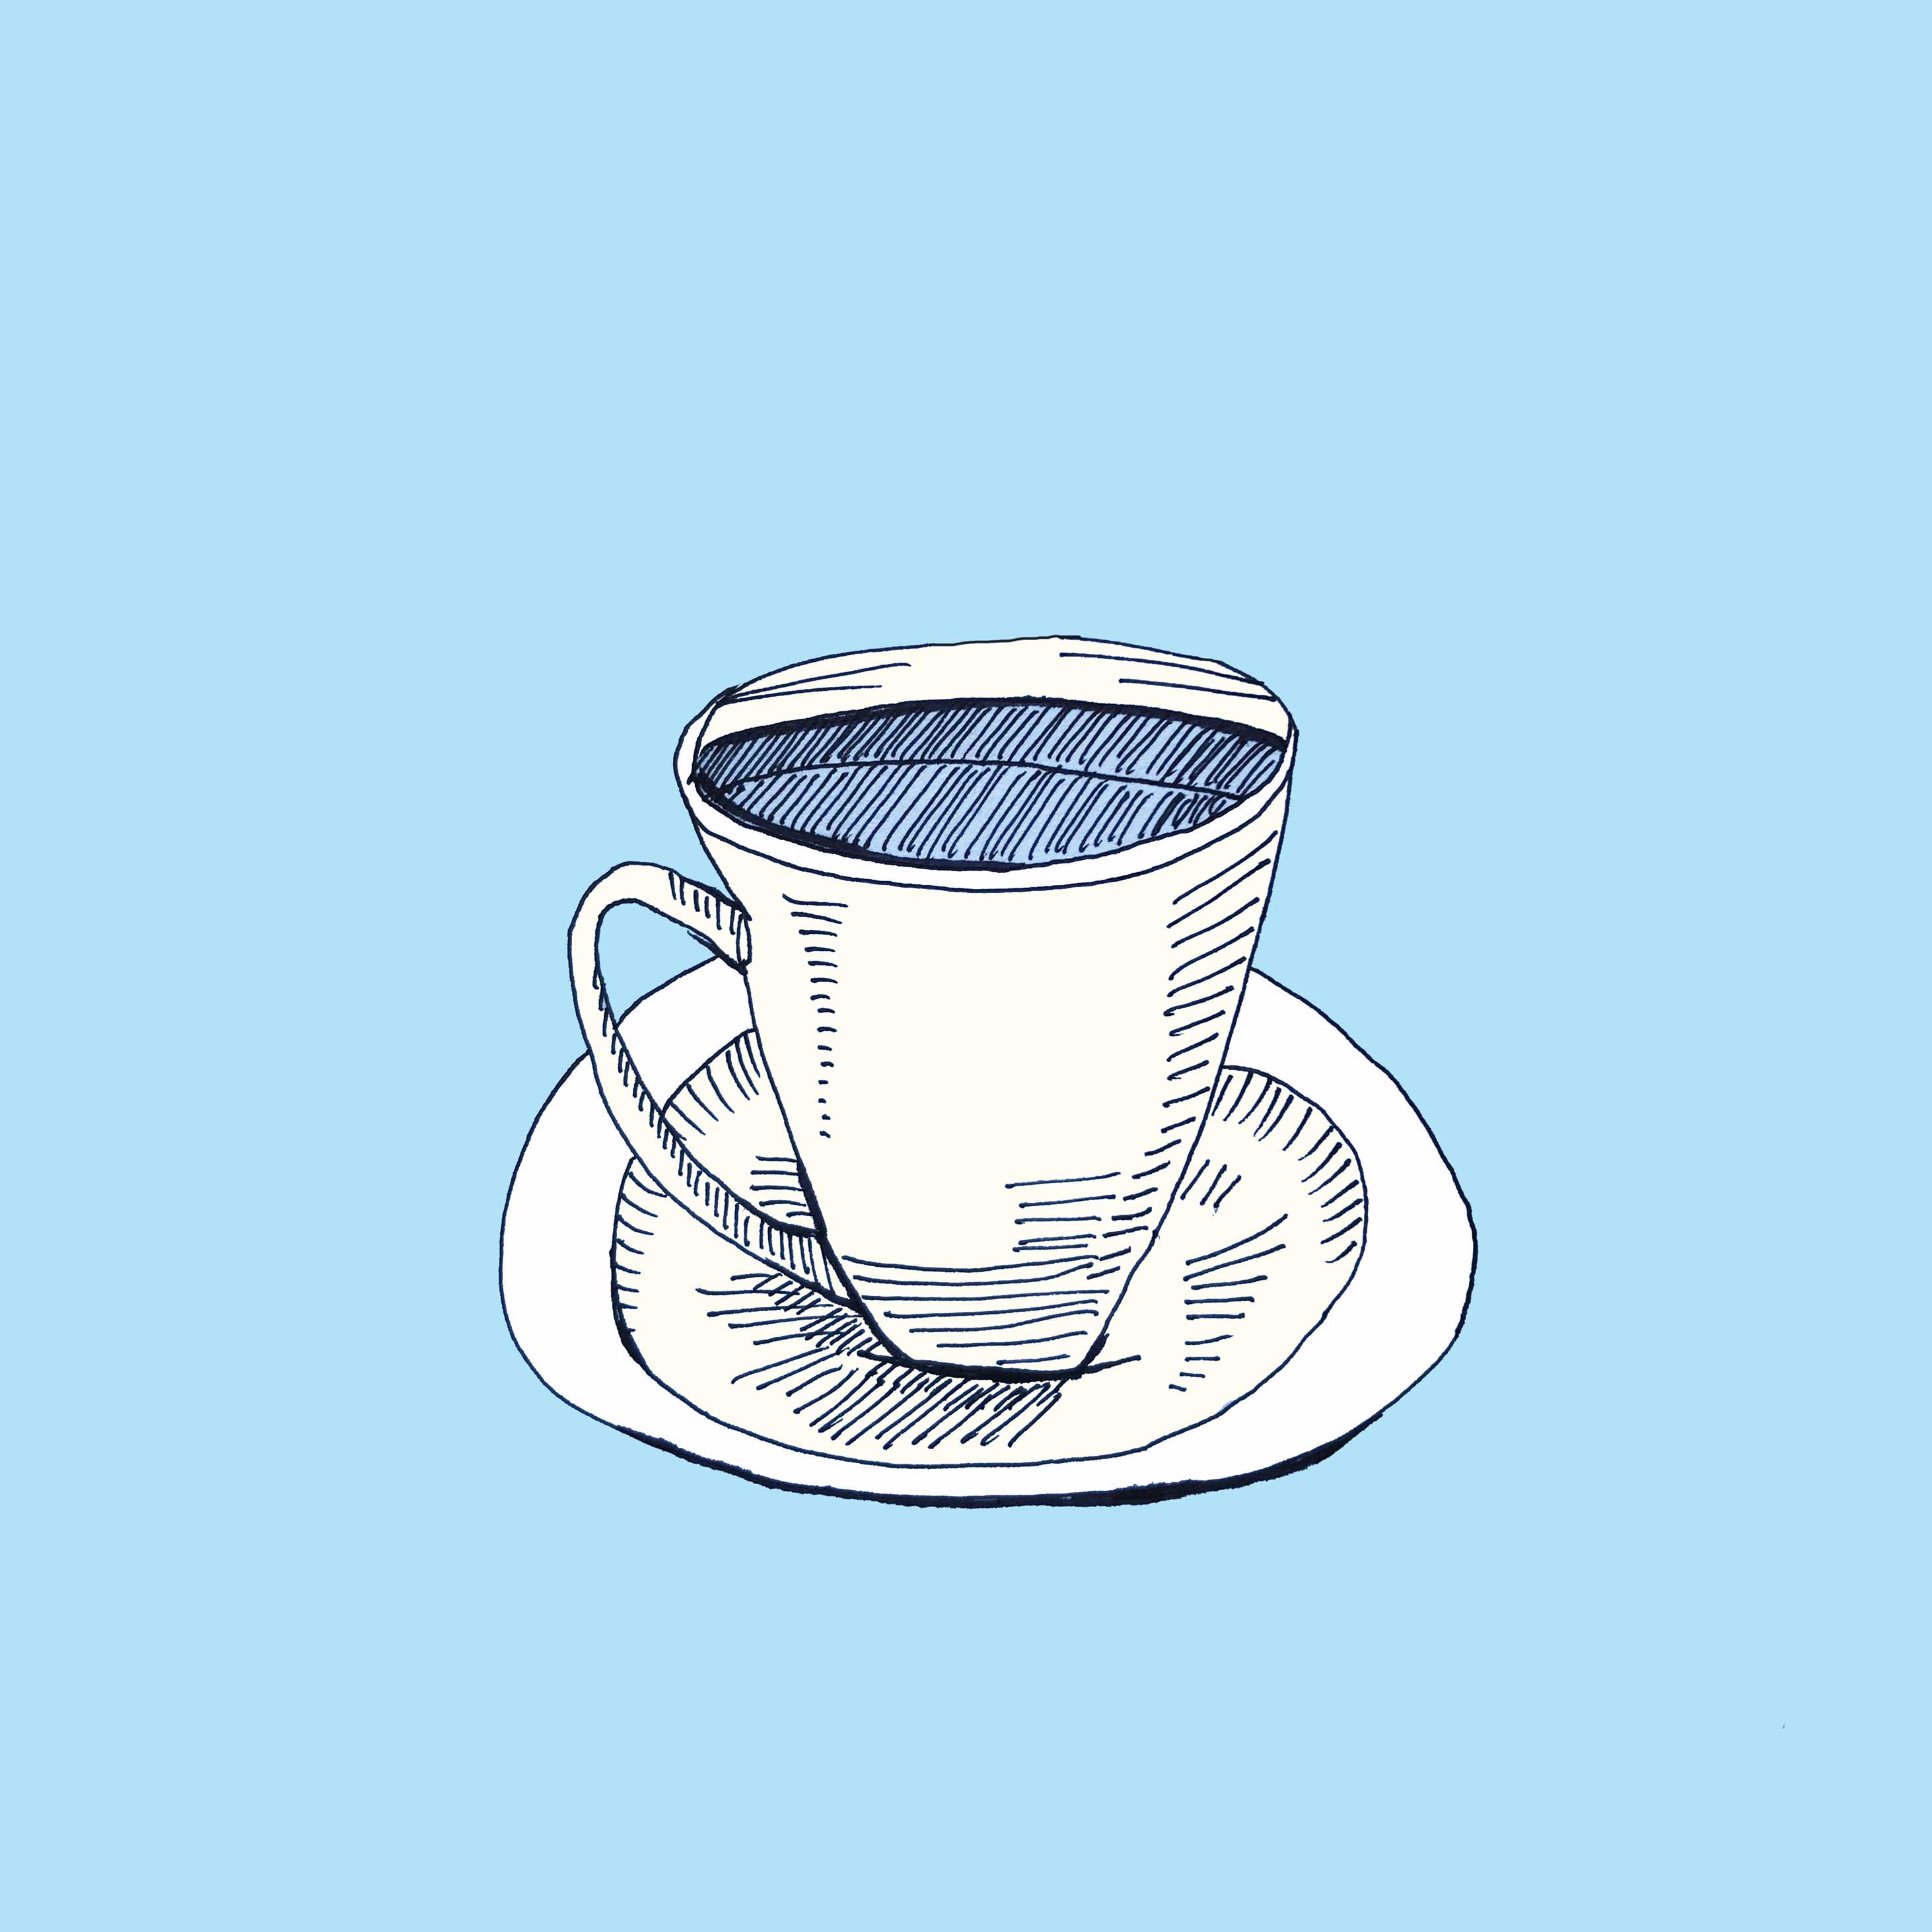 art every day number 260 / illustration / cup saucer coffee